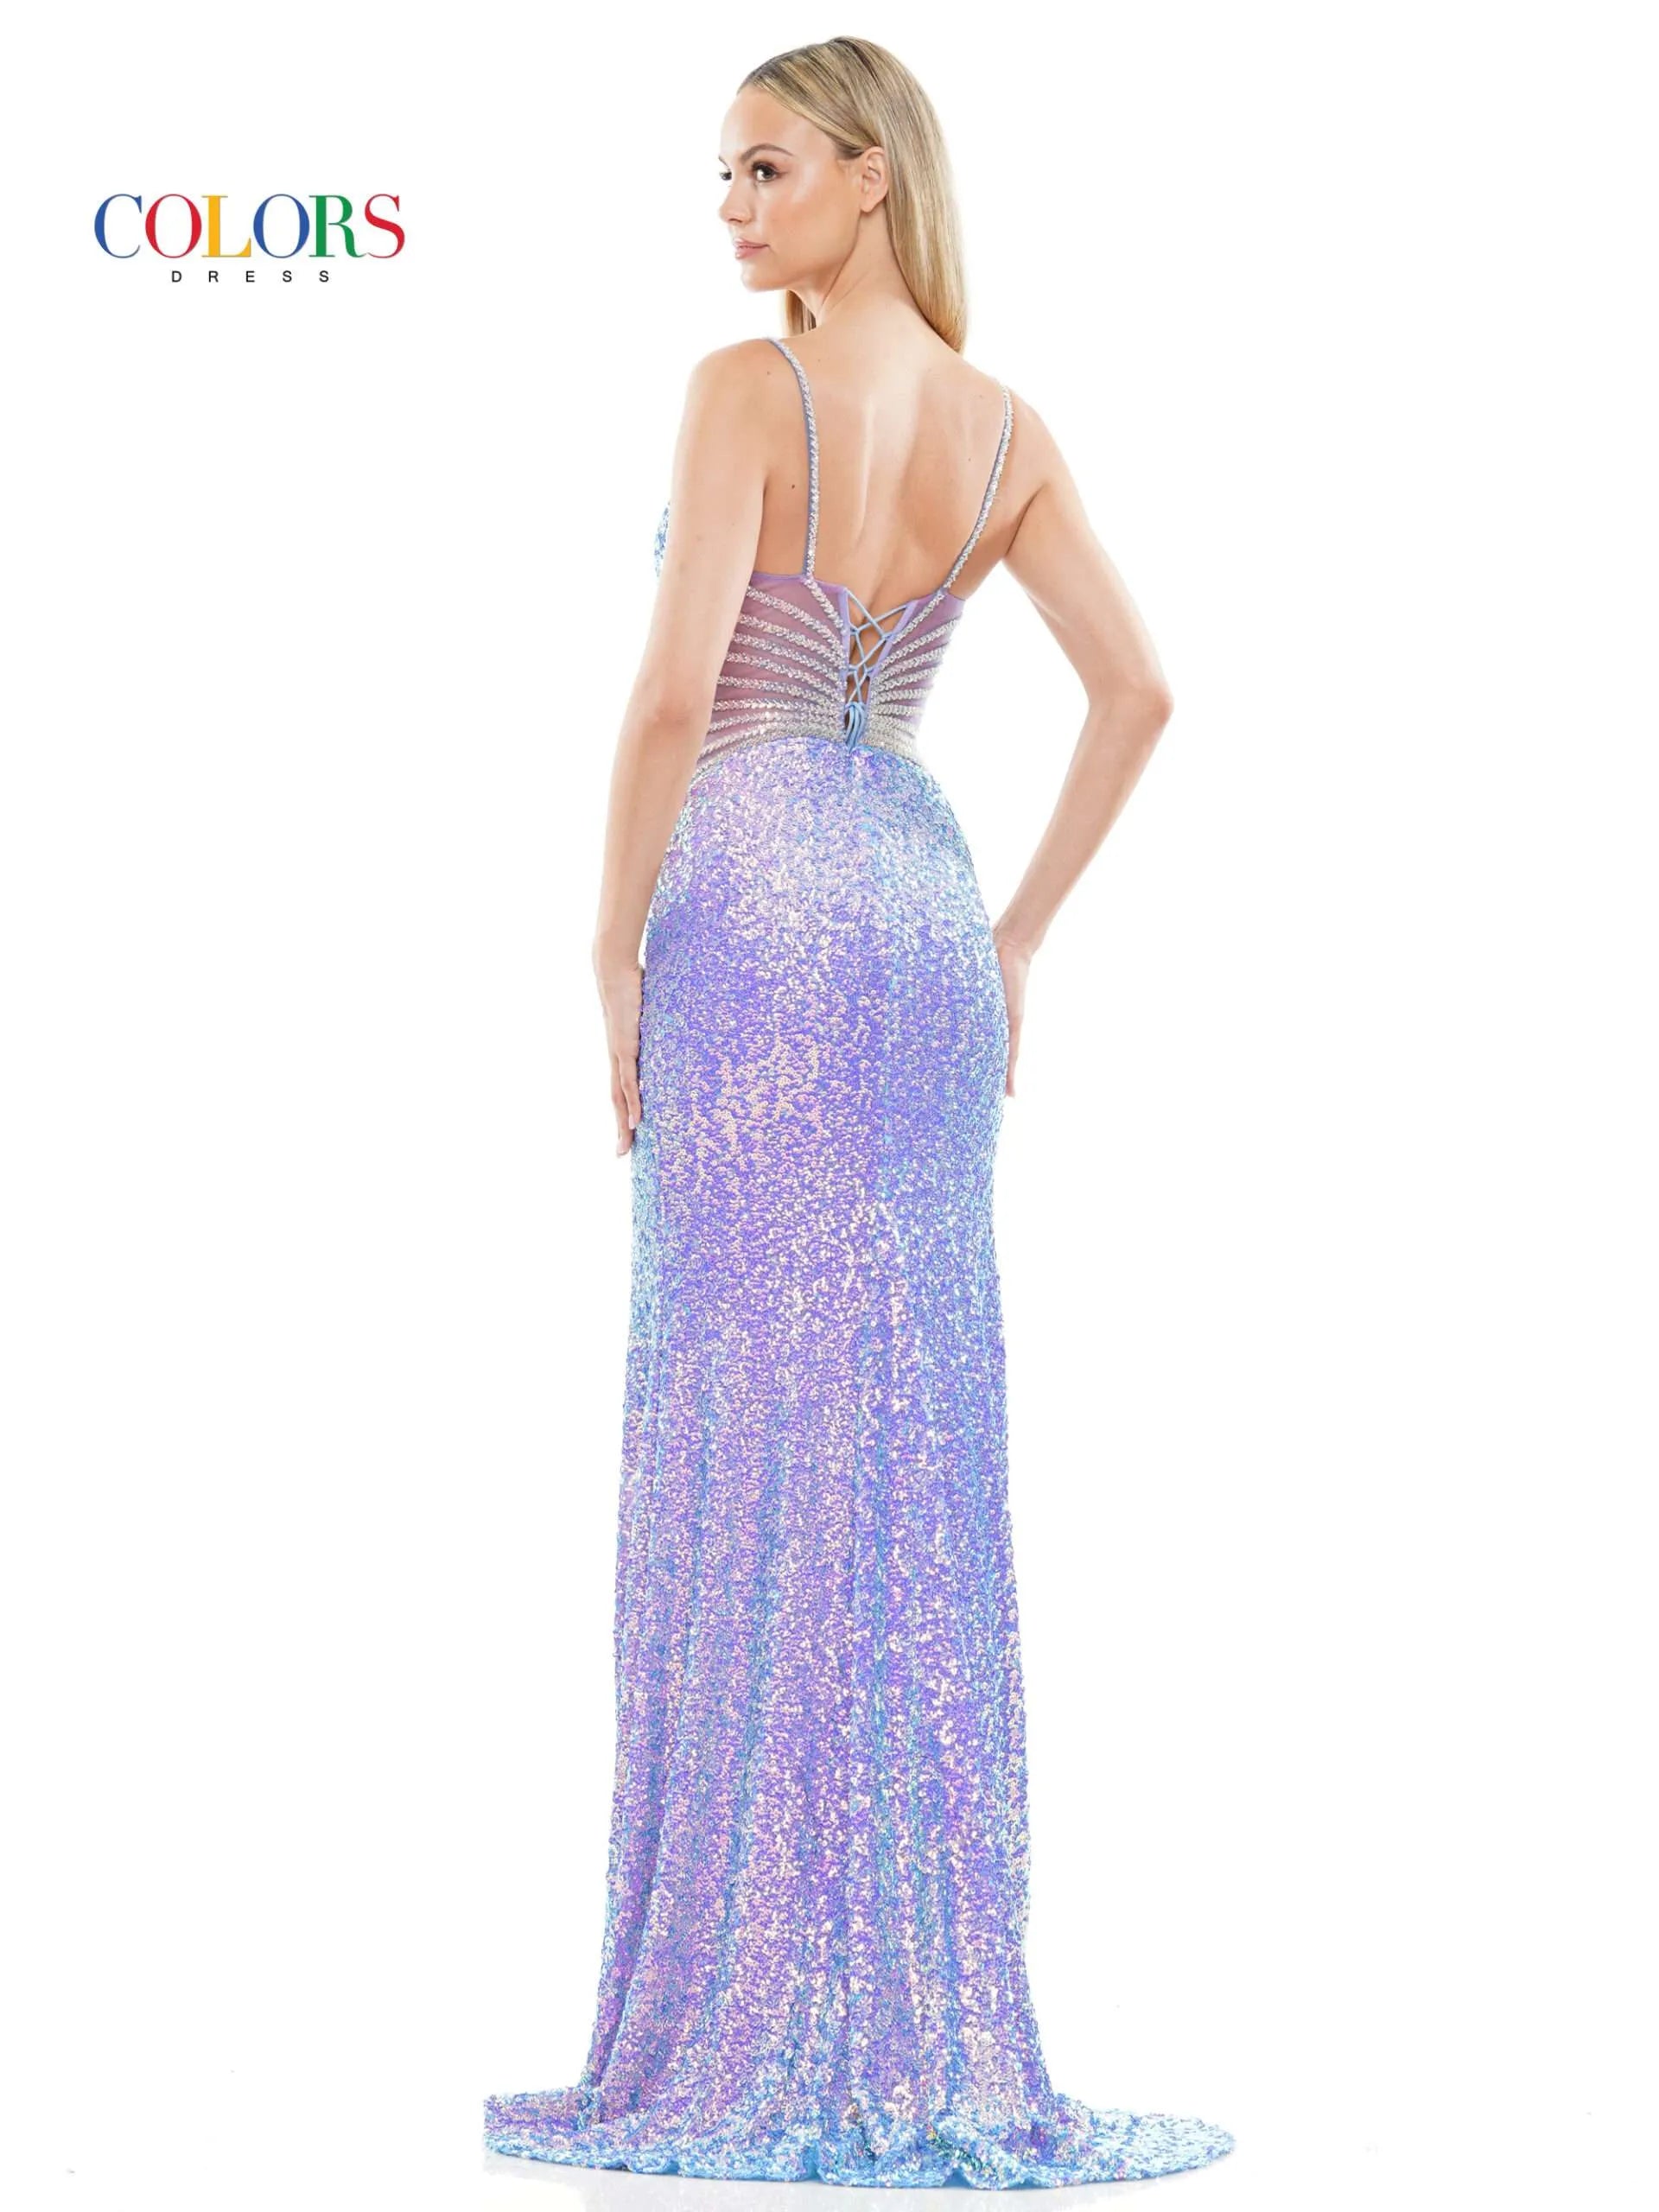 COLORFUL Sequin BLING Dresses - SEE 70 GORGEOUS Pieces NOW! • SequinQueen